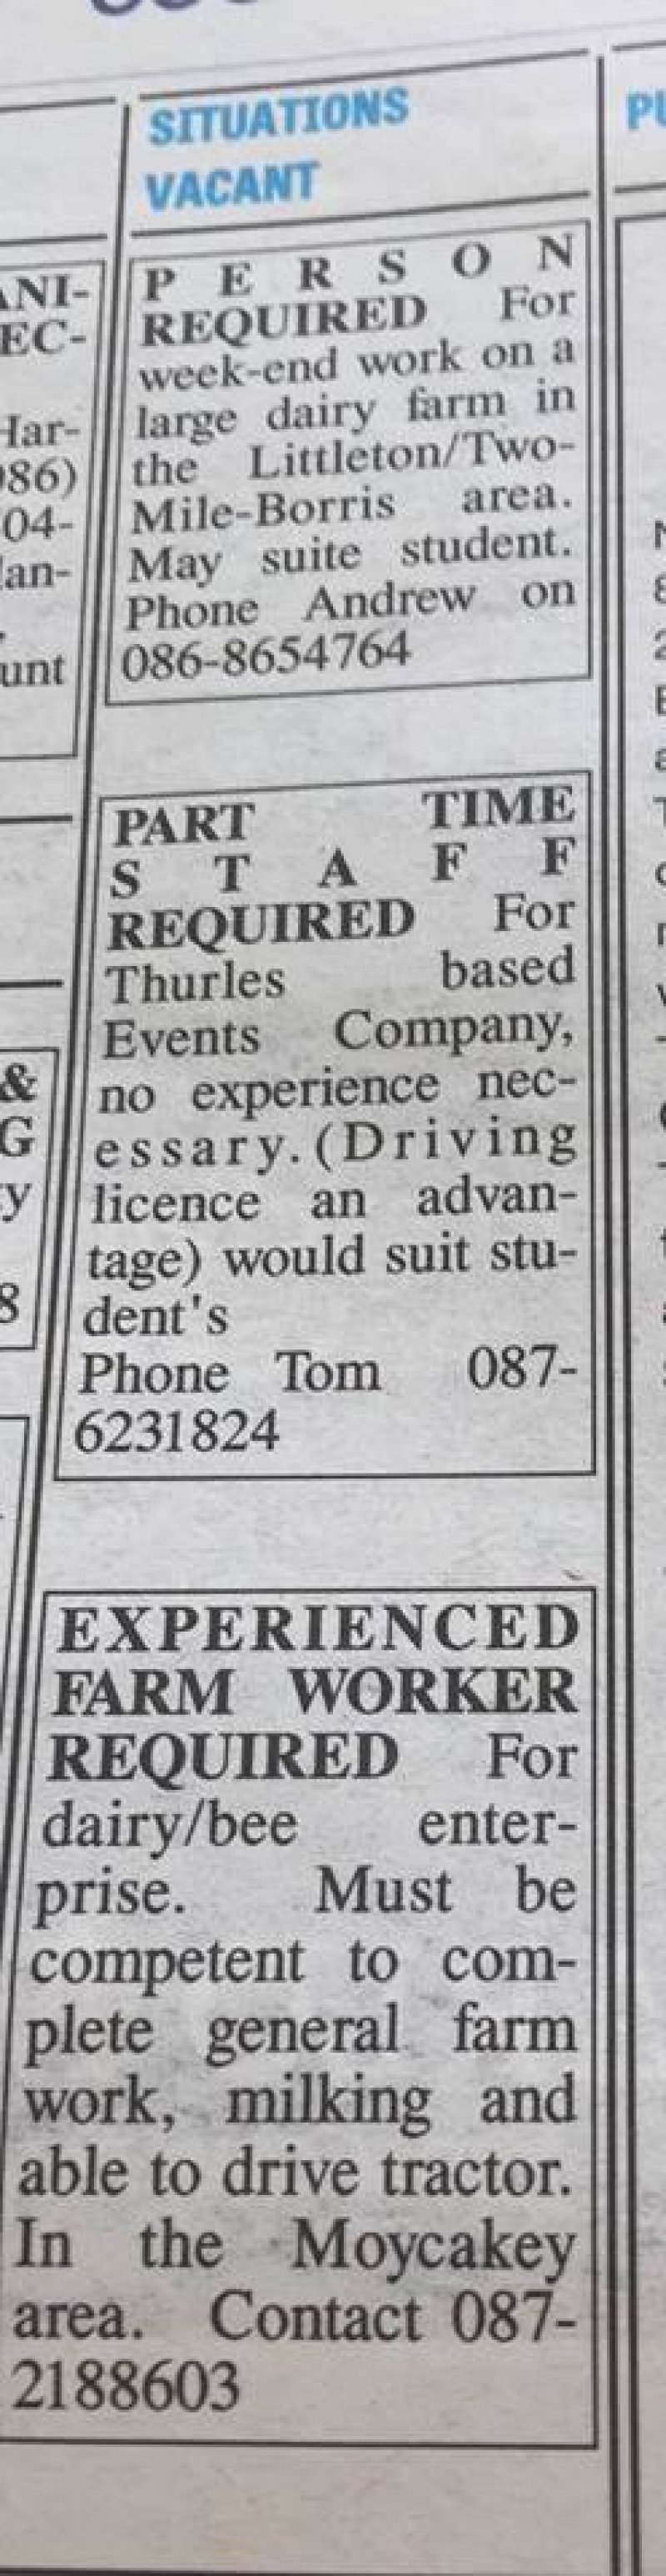 Situations Vacant - Tipperary Star